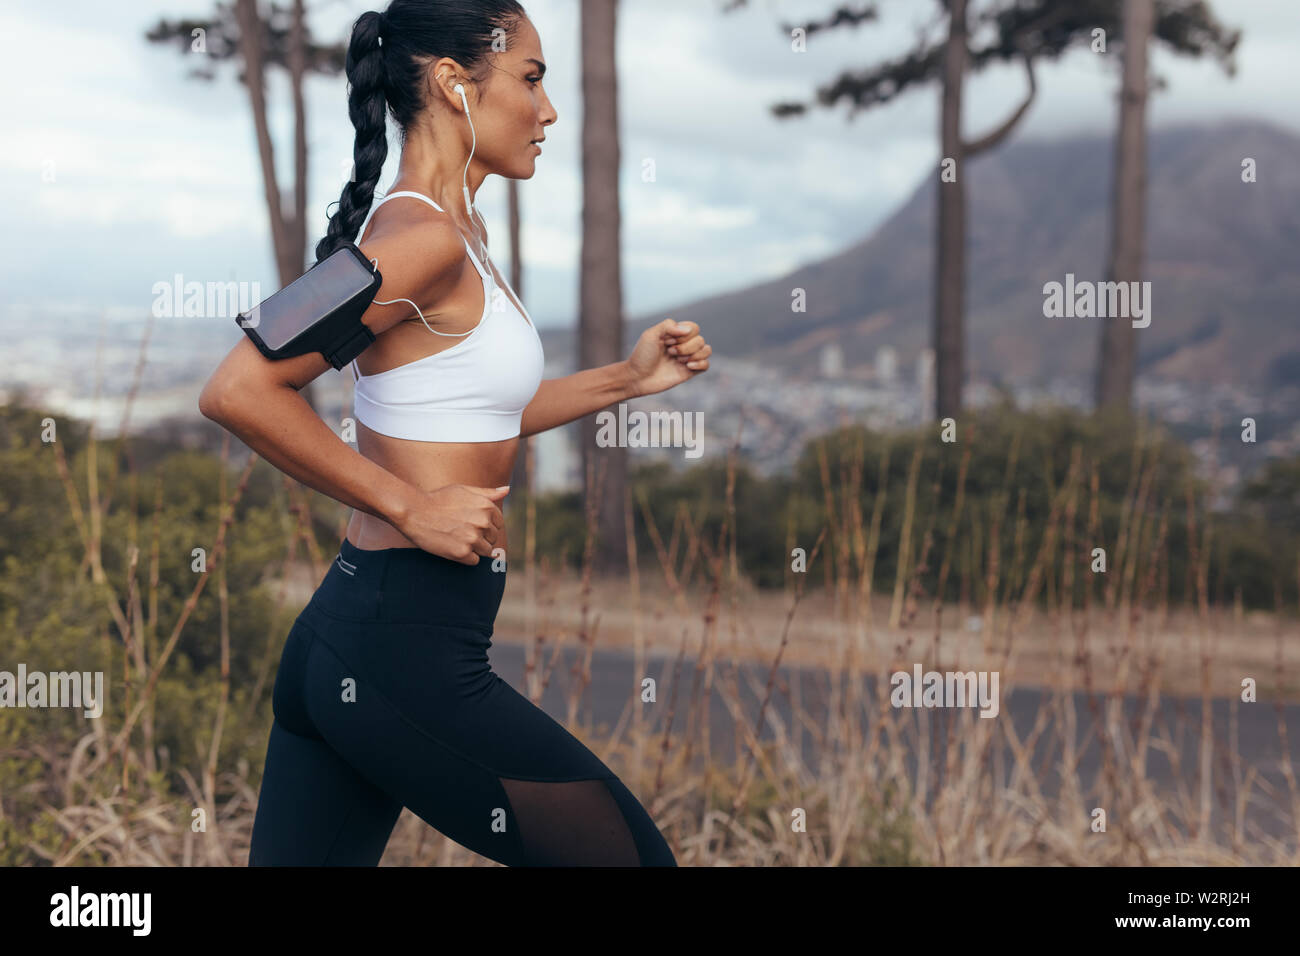 Woman athlete running on country road early in morning. fitness woman sprinting outdoors. Stock Photo